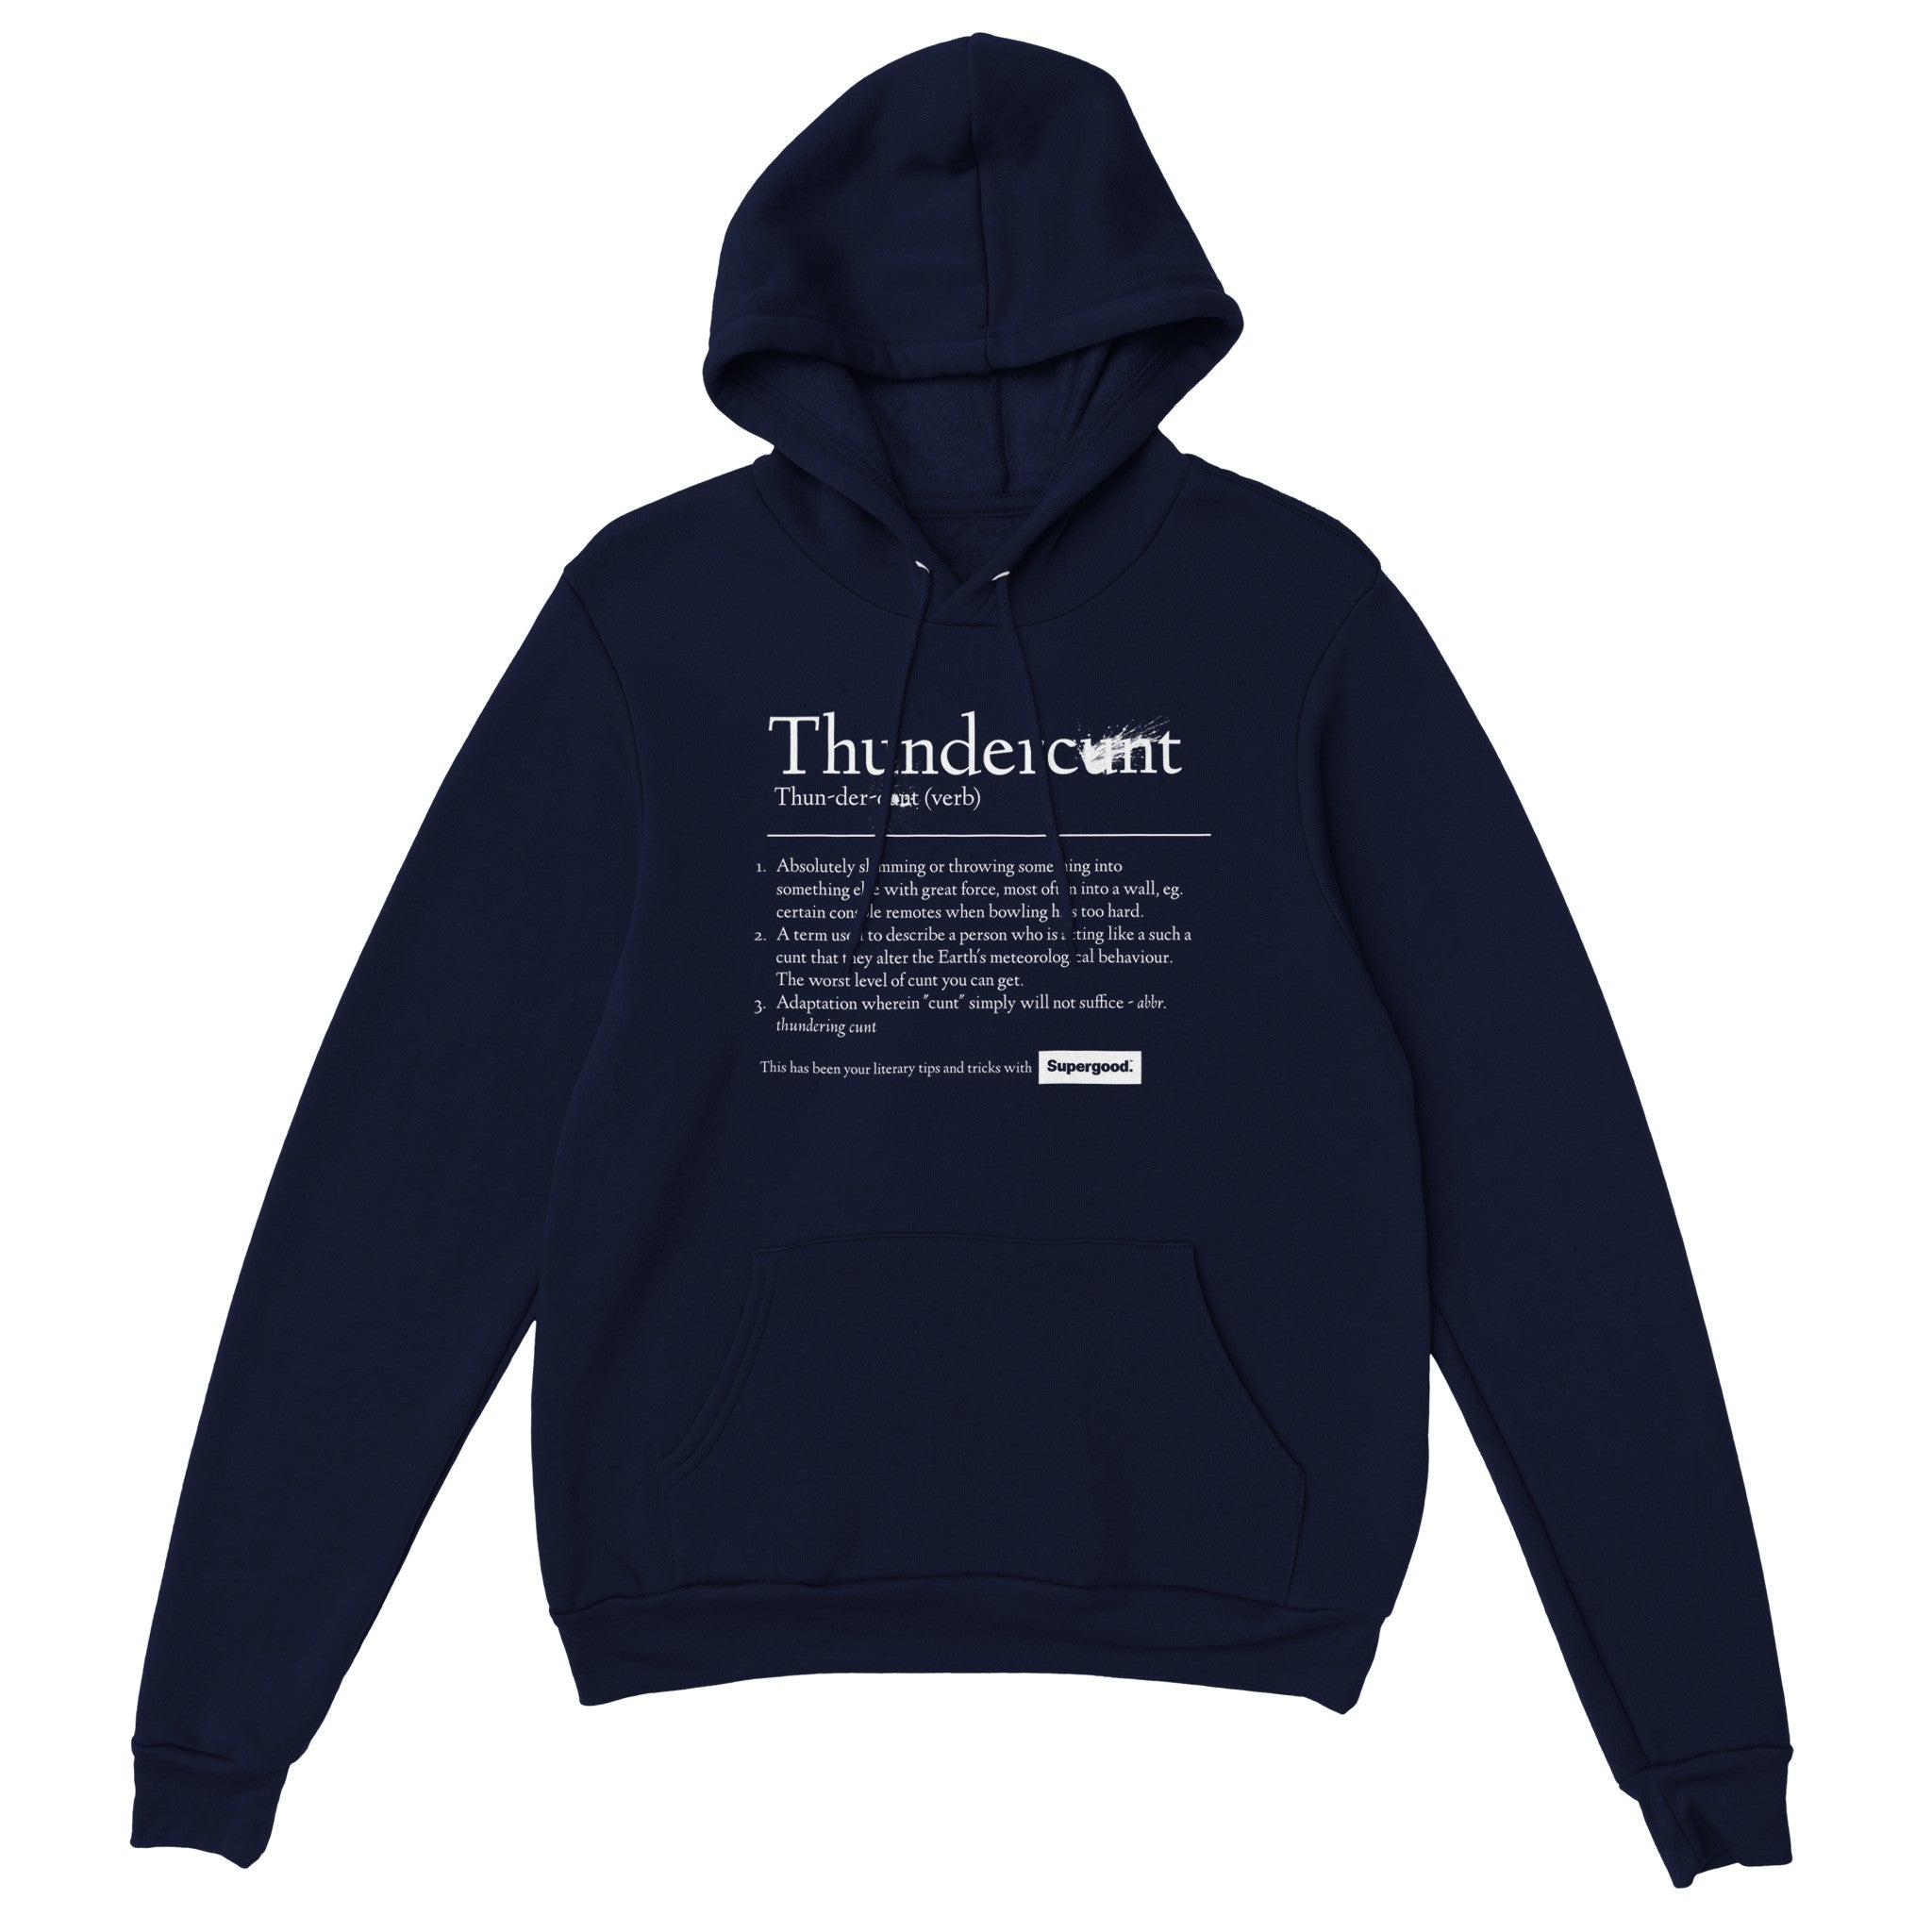 Thunderc*nt Hoodie, White Text by Supergood.-Supergood.